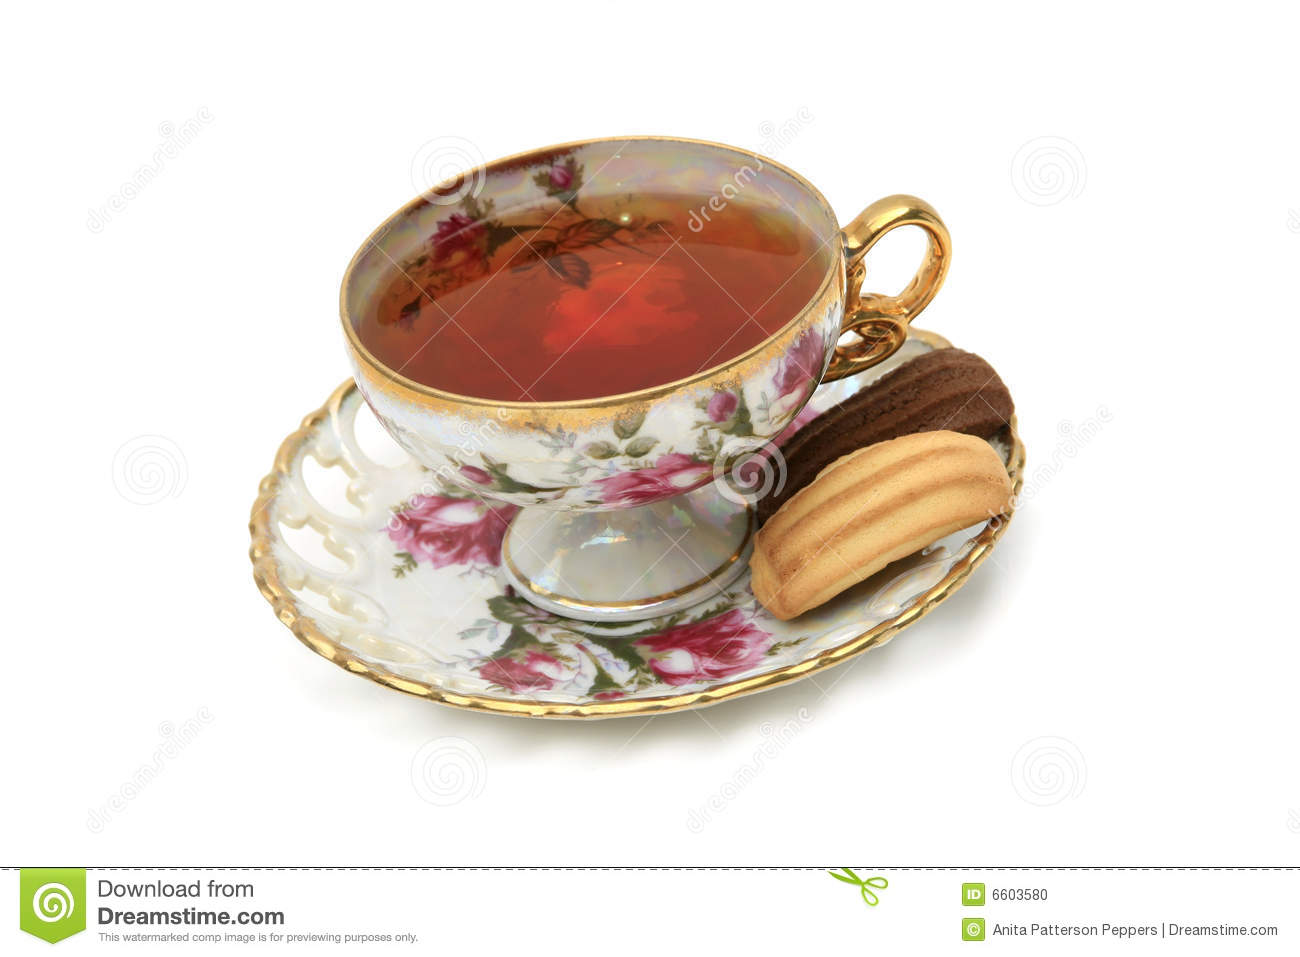 Antique China Tea Cup With Hot Tea And Cookies Isolated On White